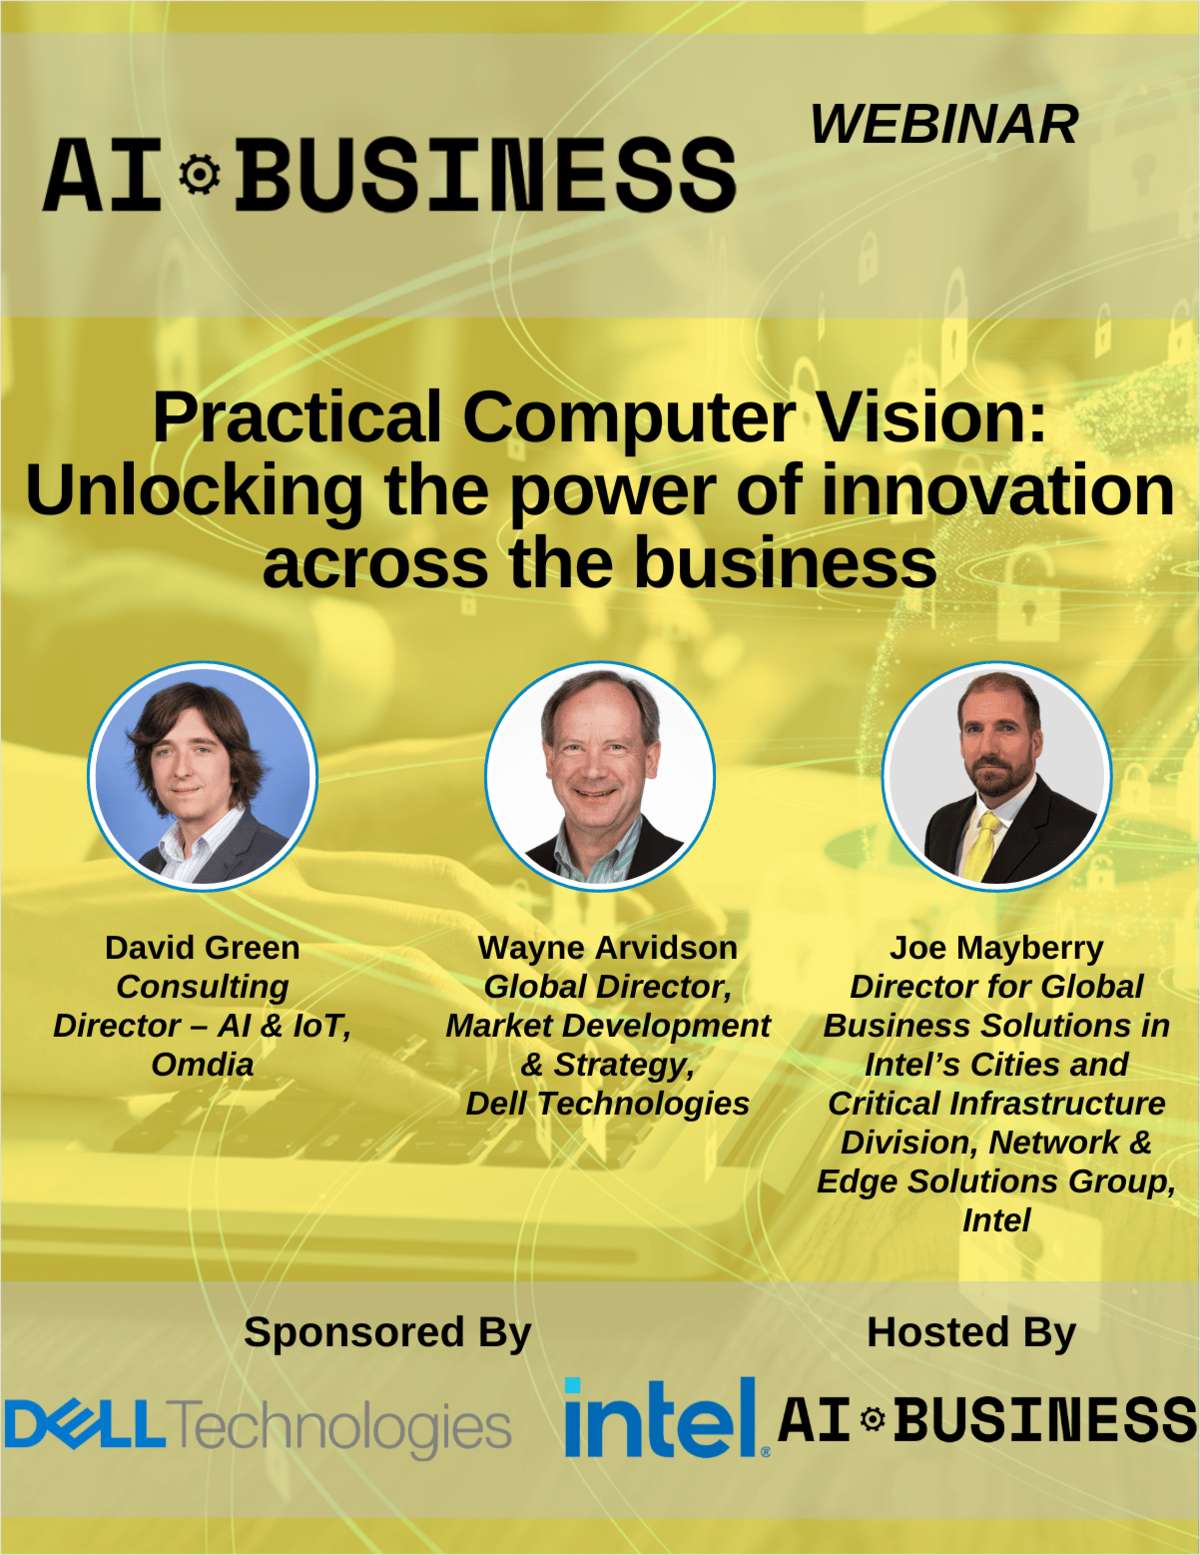 Practical Computer Vision: Unlocking the power of innovation across the business